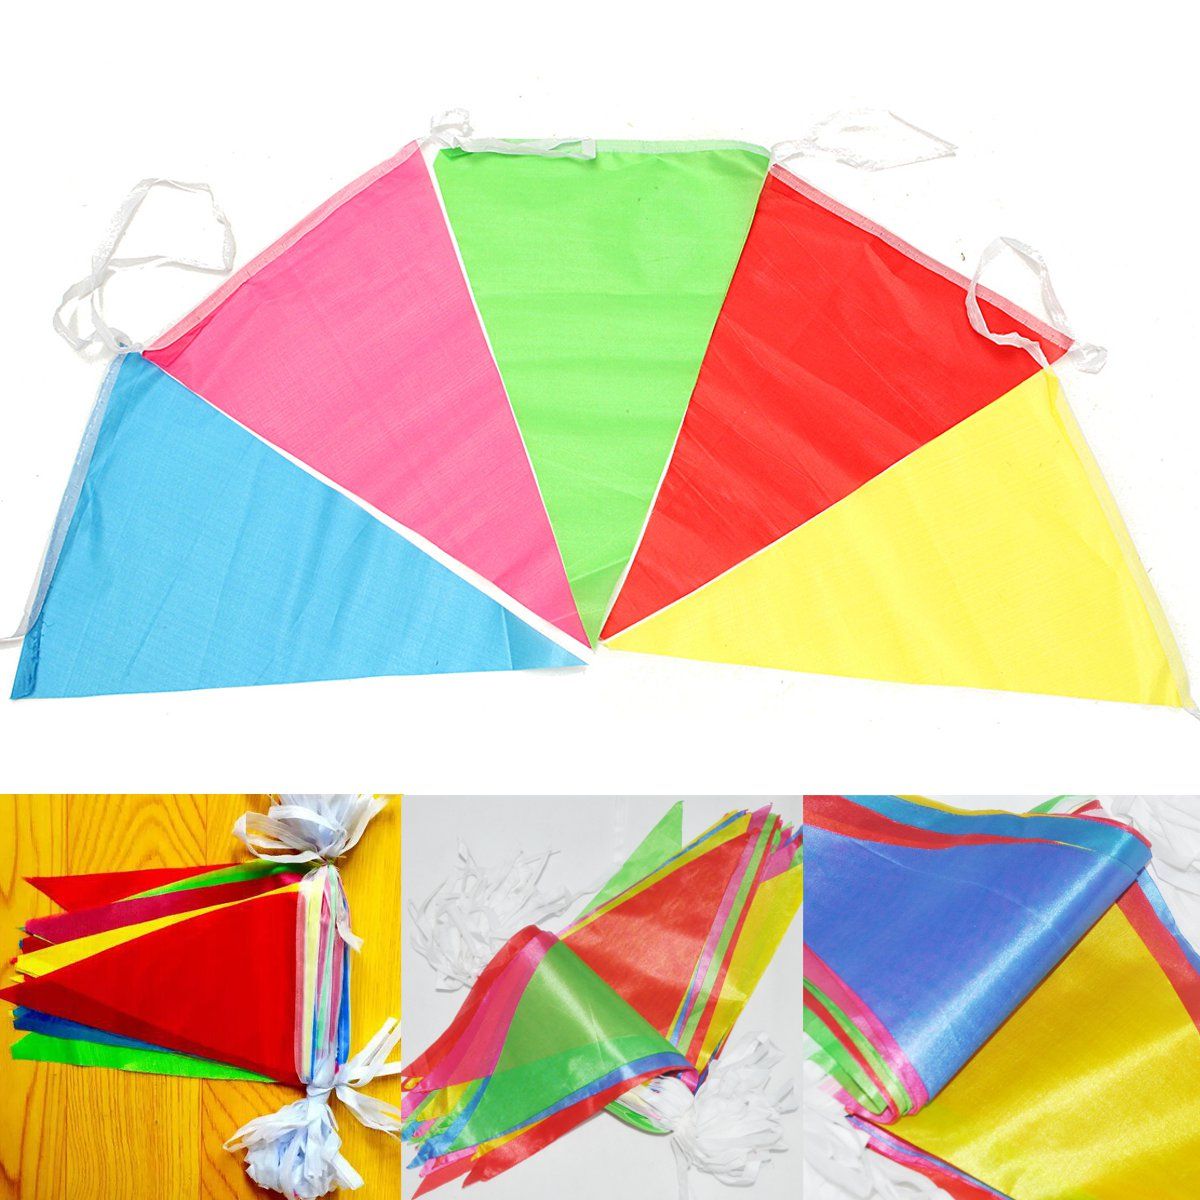 125ft-Multicolors-Triangle-Pennant-Flag-Party-Wedding-Birthday-Banner-Bunting-Decorations-1128722